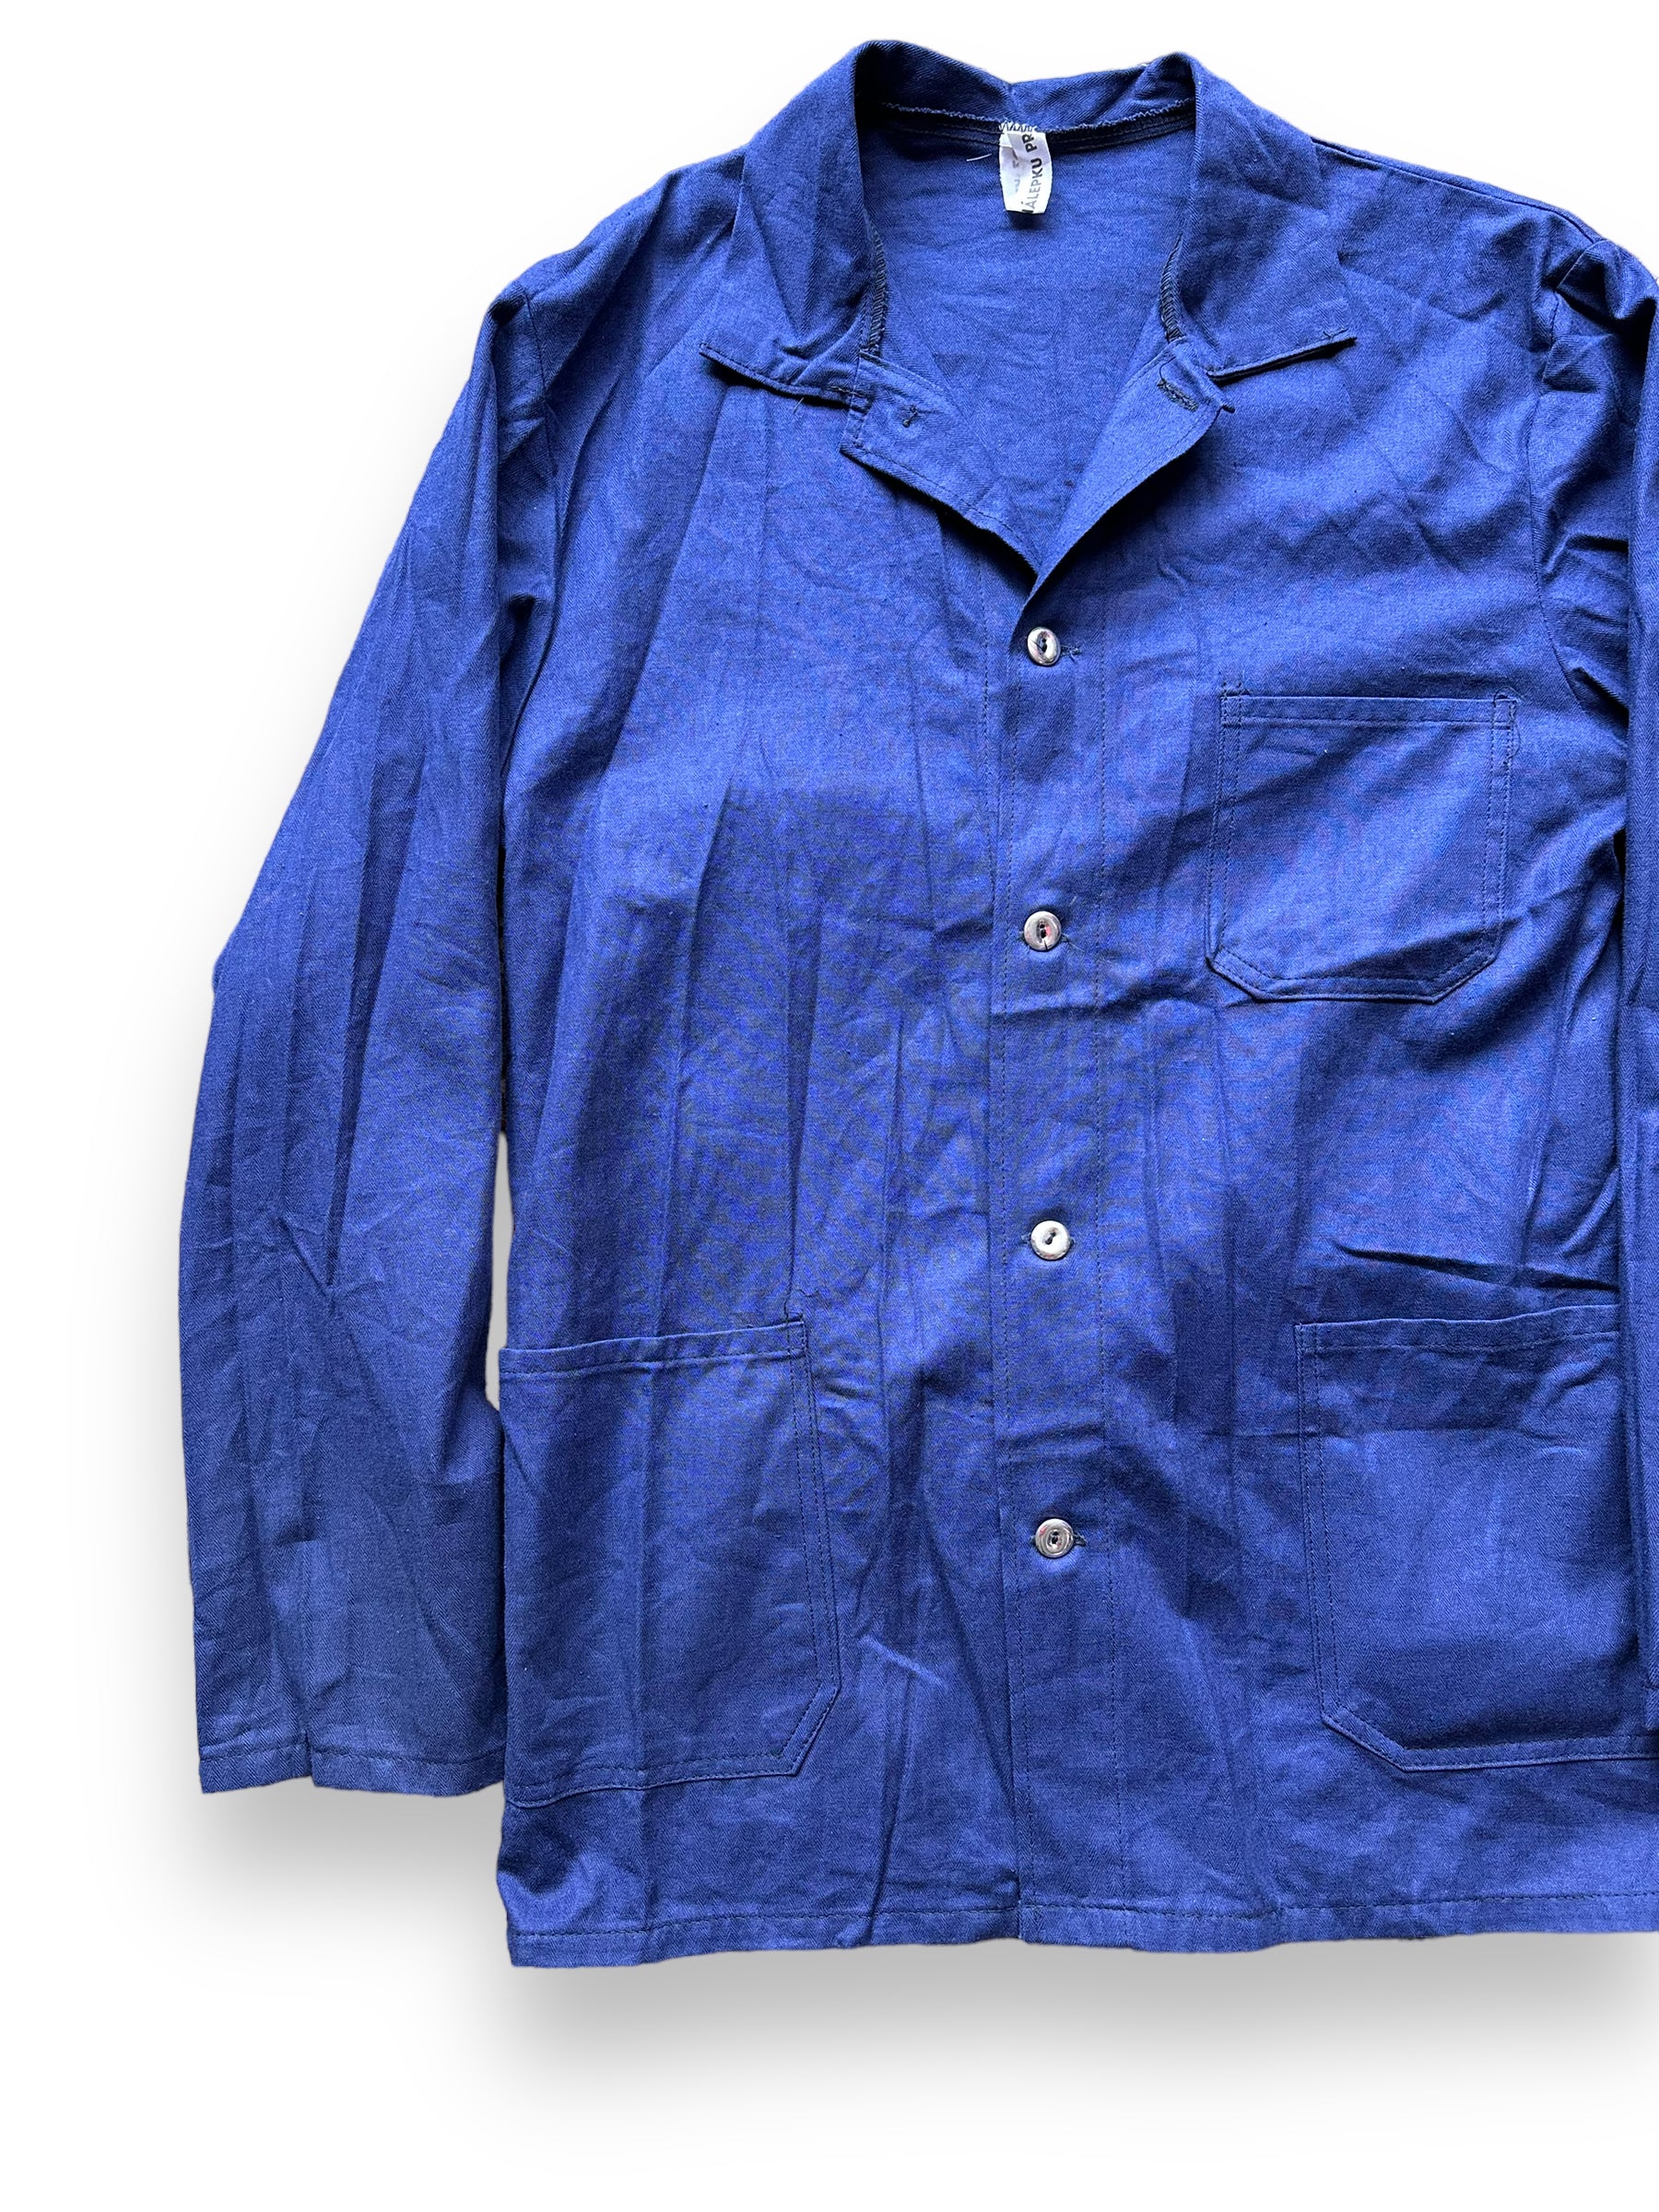 Front Right View of Vintage Light Cotton European Workwear Shirt SZ M | Vintage European Workwear Seattle | Barn Owl Vintage Goods Seattle